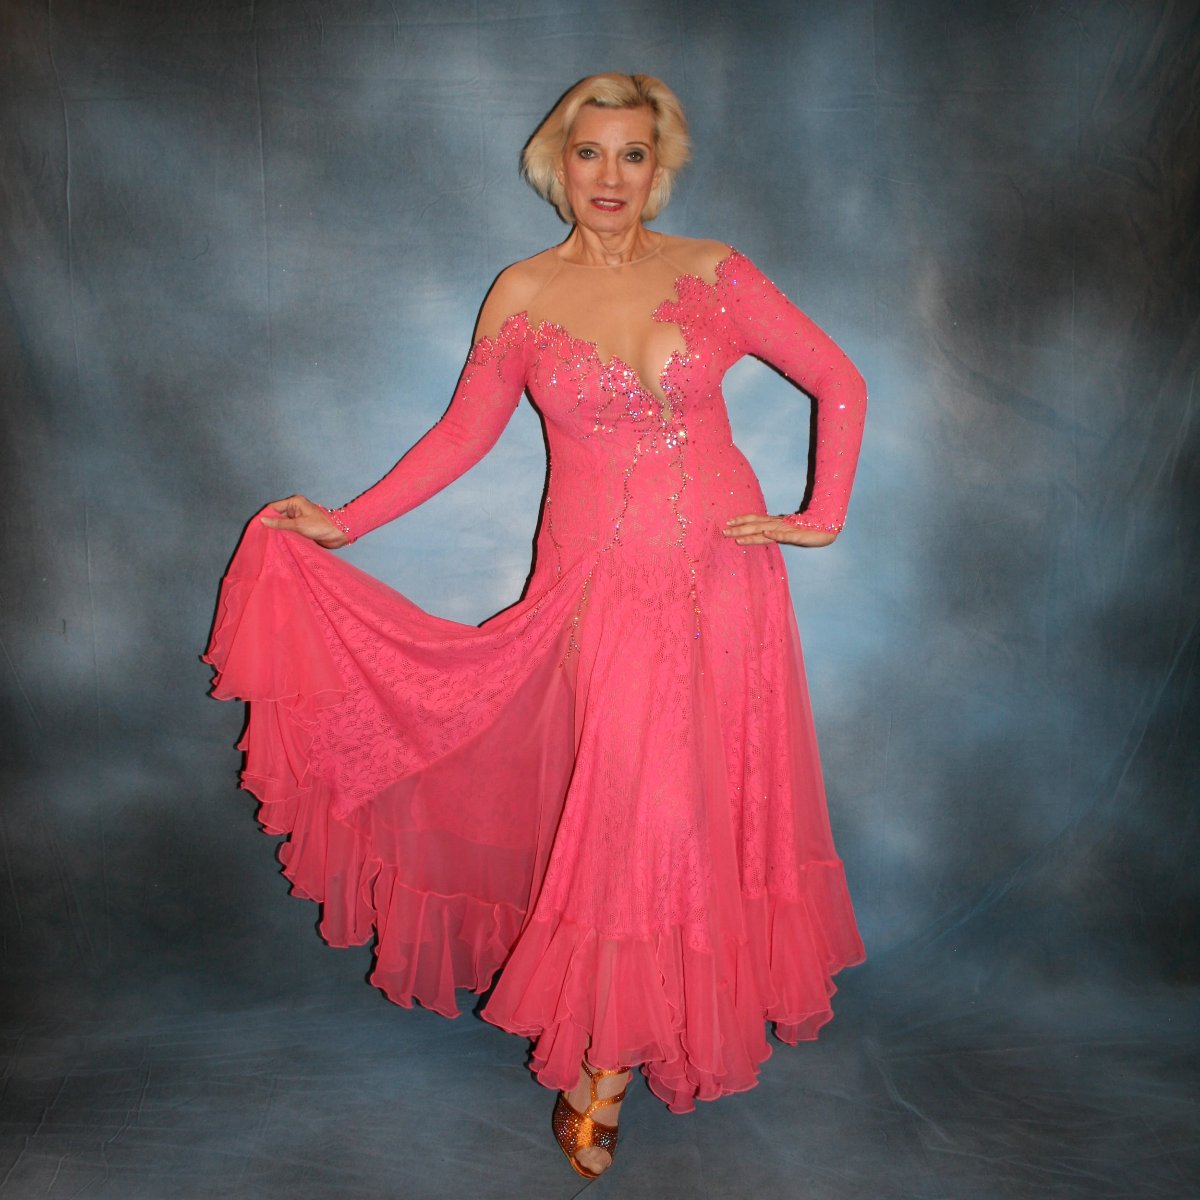 Crystal's Creations Gorgeous salmon pink ballroom dance dress was created from salmon pink stretch lace on nude illusion base with yards & yards of salmon pink chiffon insets & flounces …